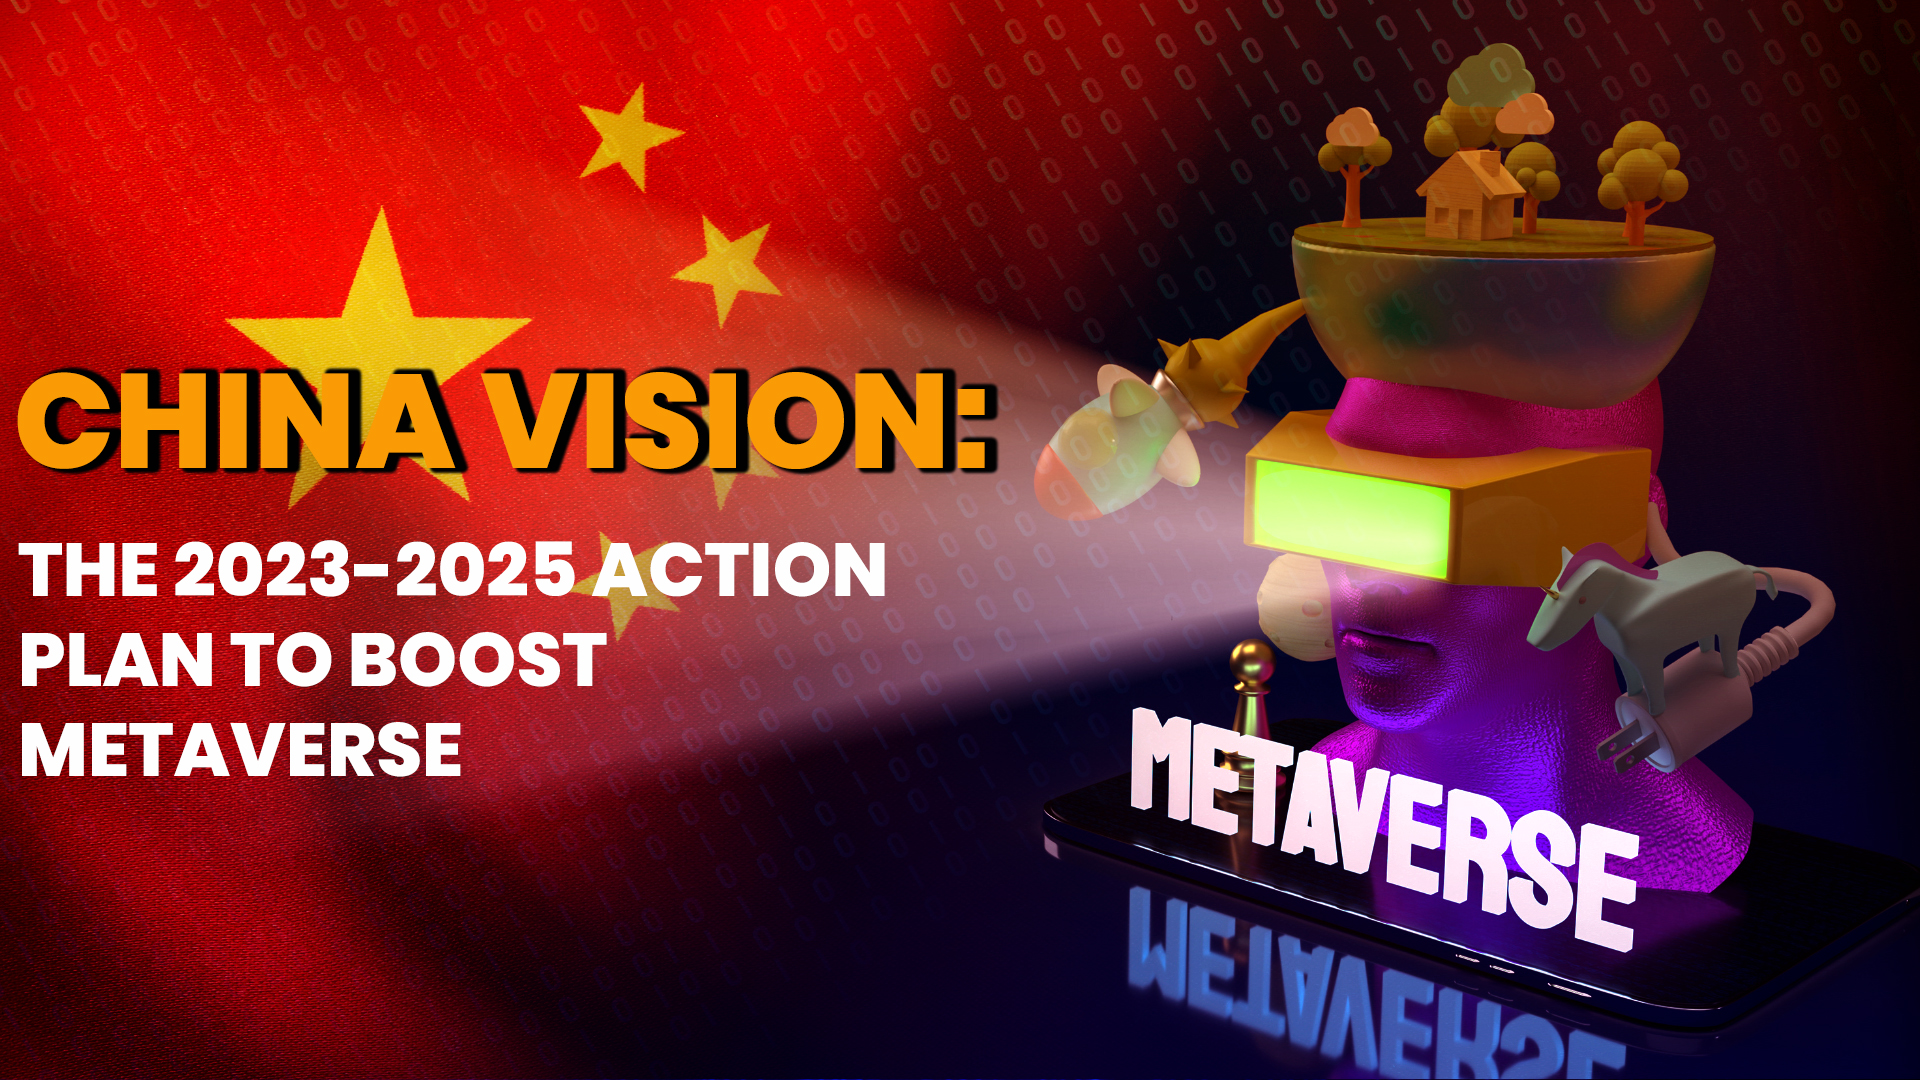 China Vision: The 2023-2025 Action Plan To Boost Metaverse 